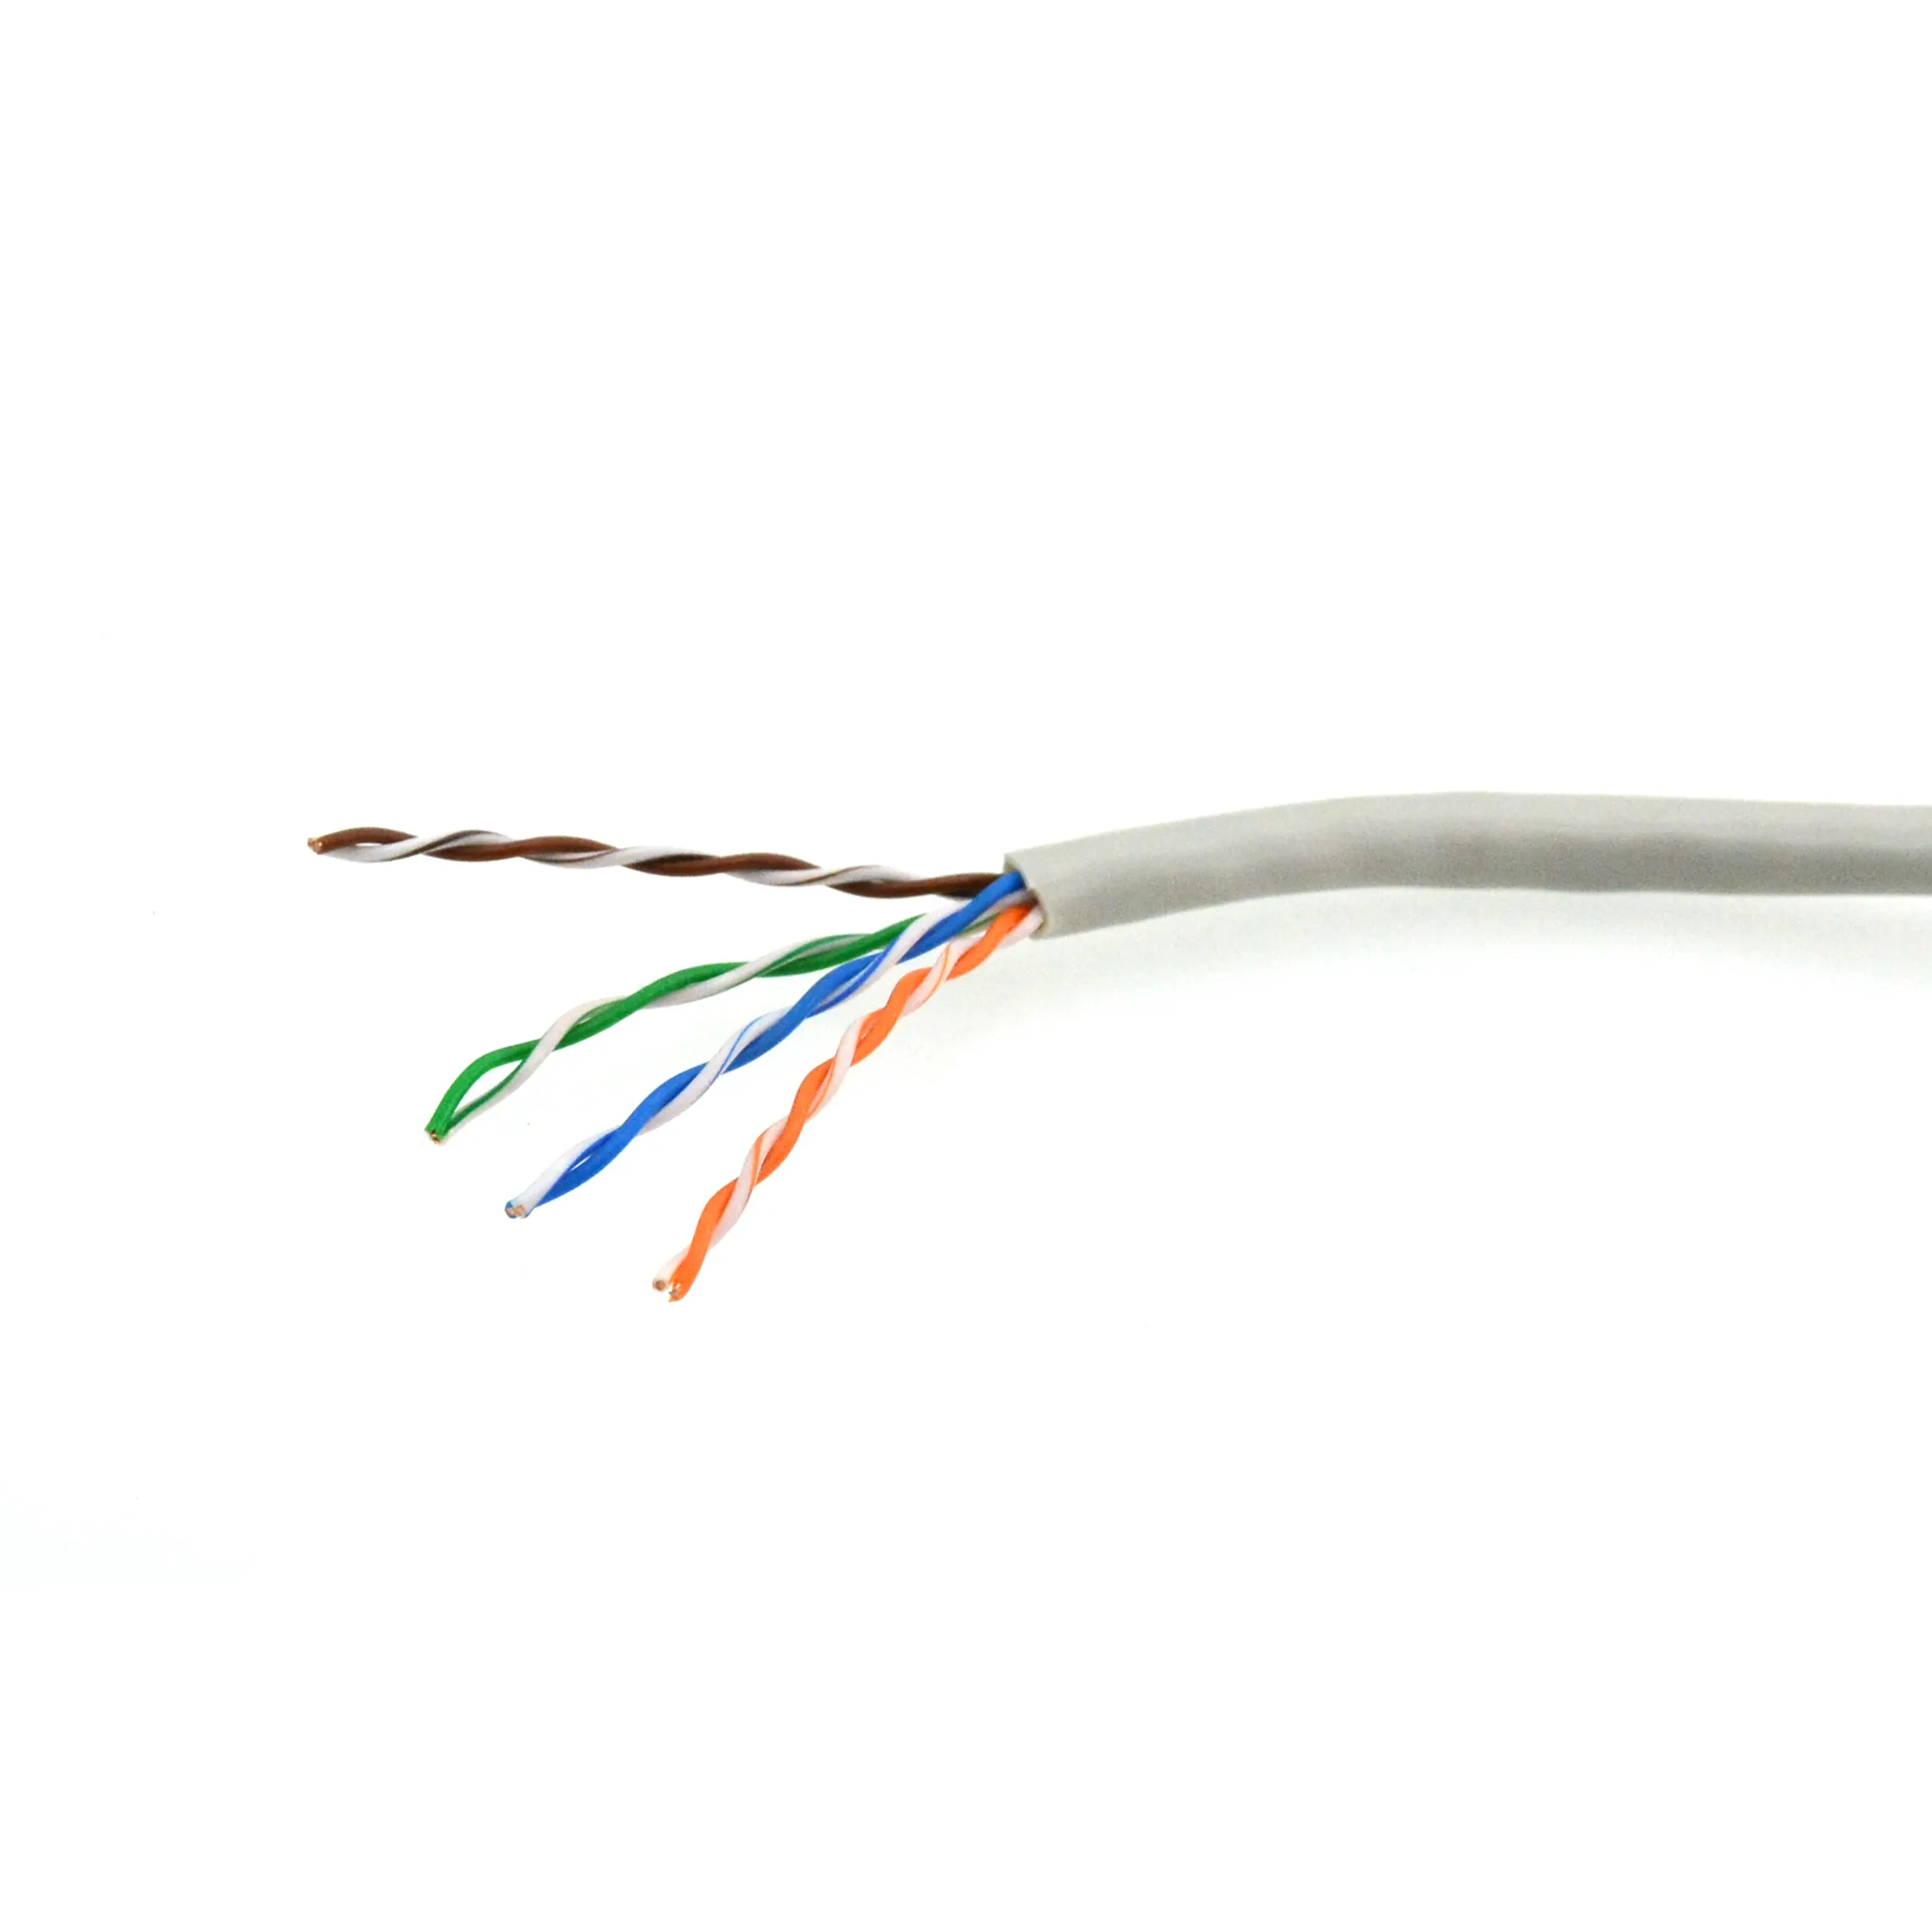 High Quality Utp Cat 5 Network Cable Pvc Ethernet Lan Cable For Internet